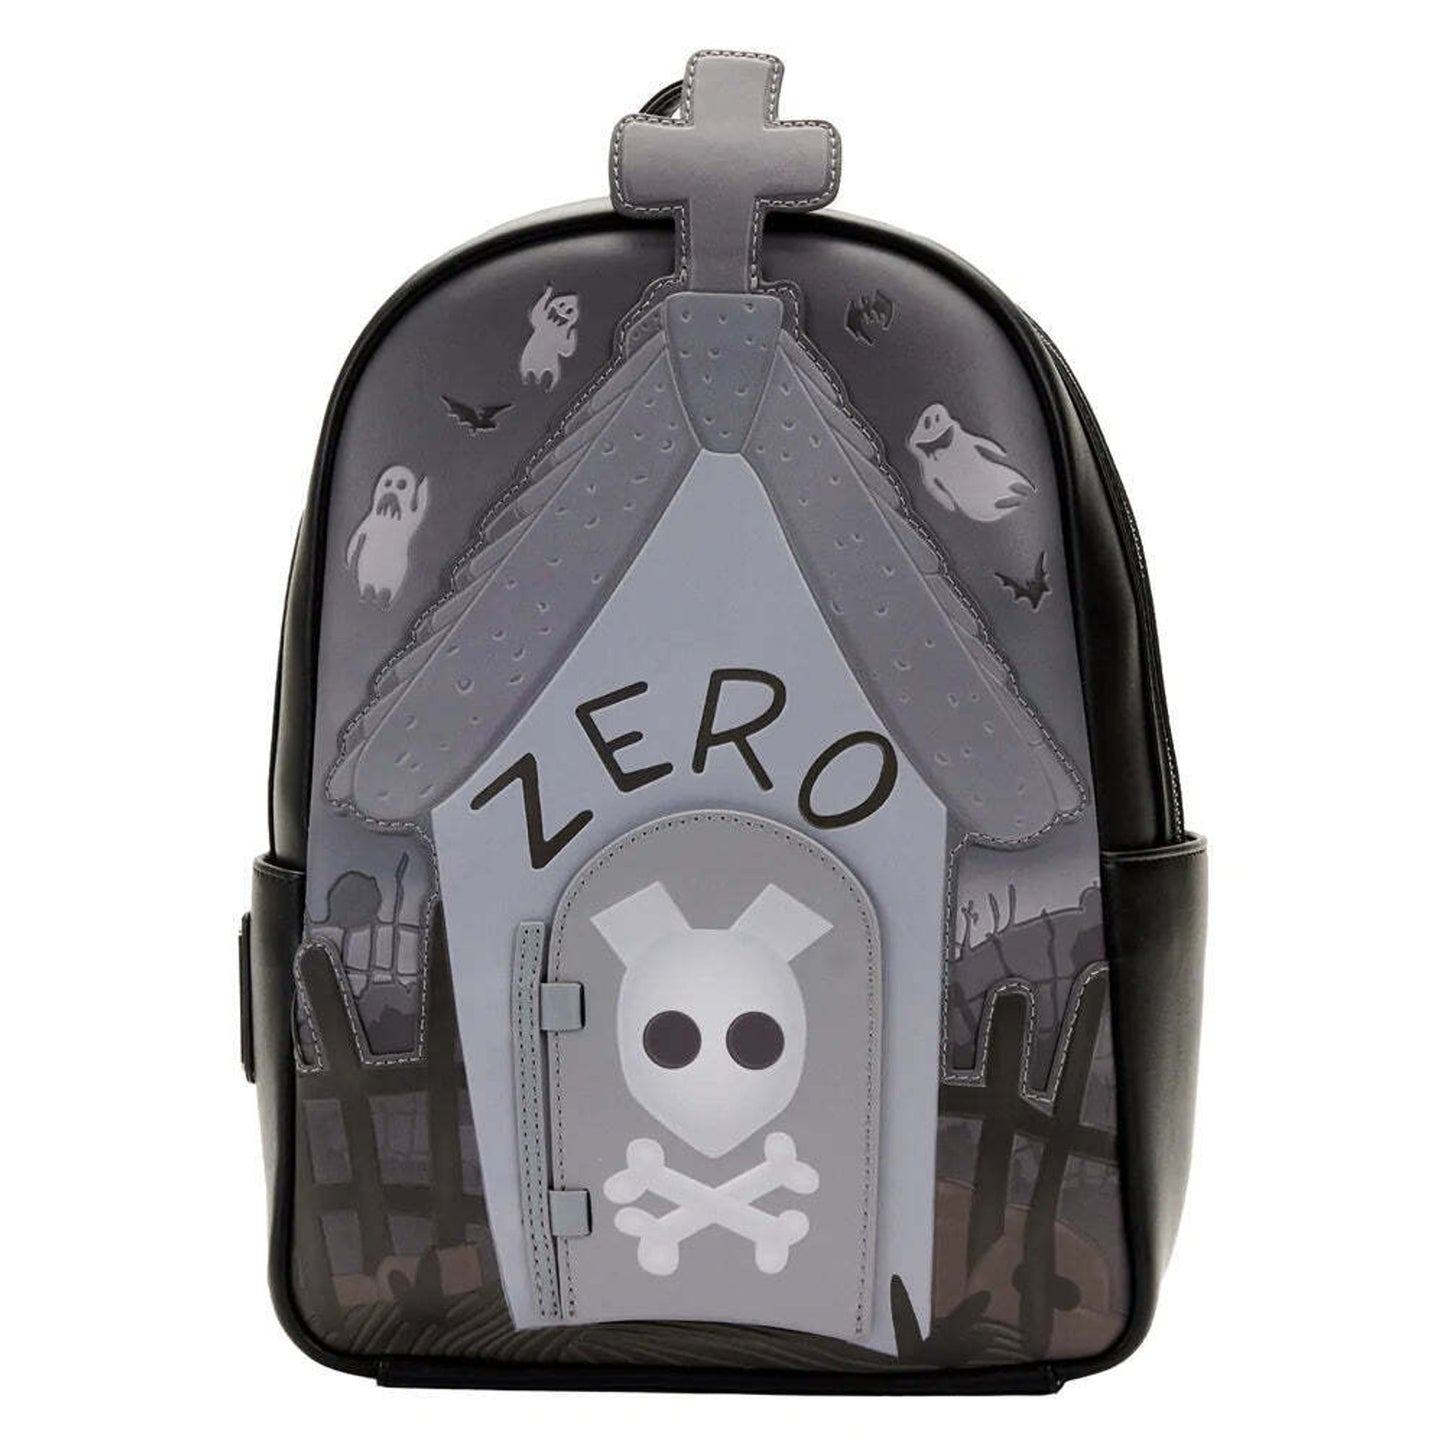 NYCC Bundle Exclusive - The Nightmare Before Christmas Zero Pop Mini Backpack (With Pop)